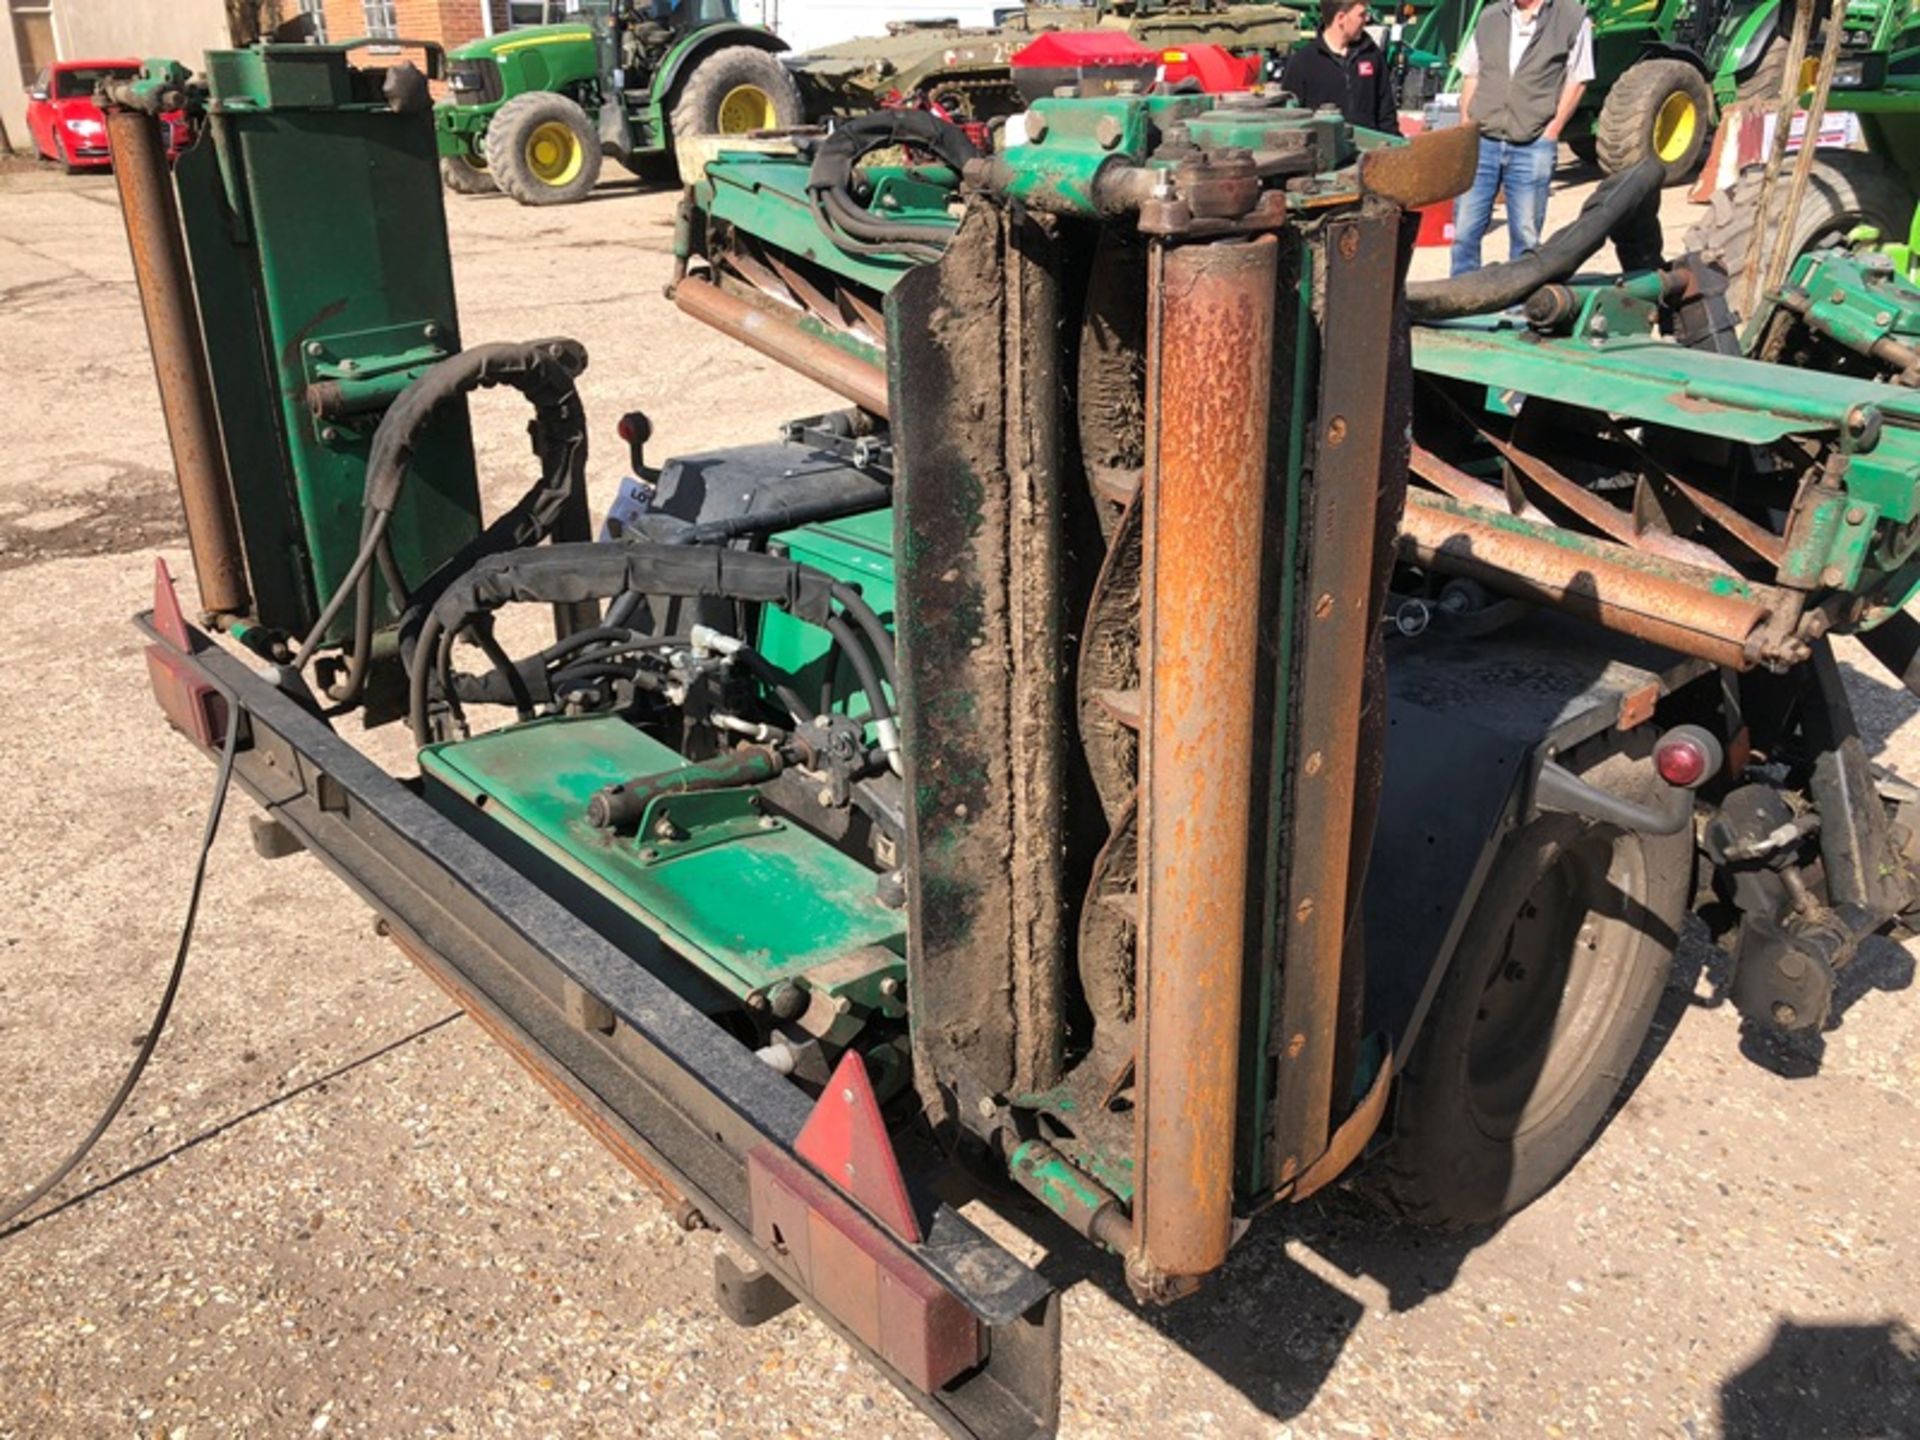 Ransomes TG4650 seven gang PTO driven trailed cylinder mower complete, with another TG4650... - Image 7 of 14